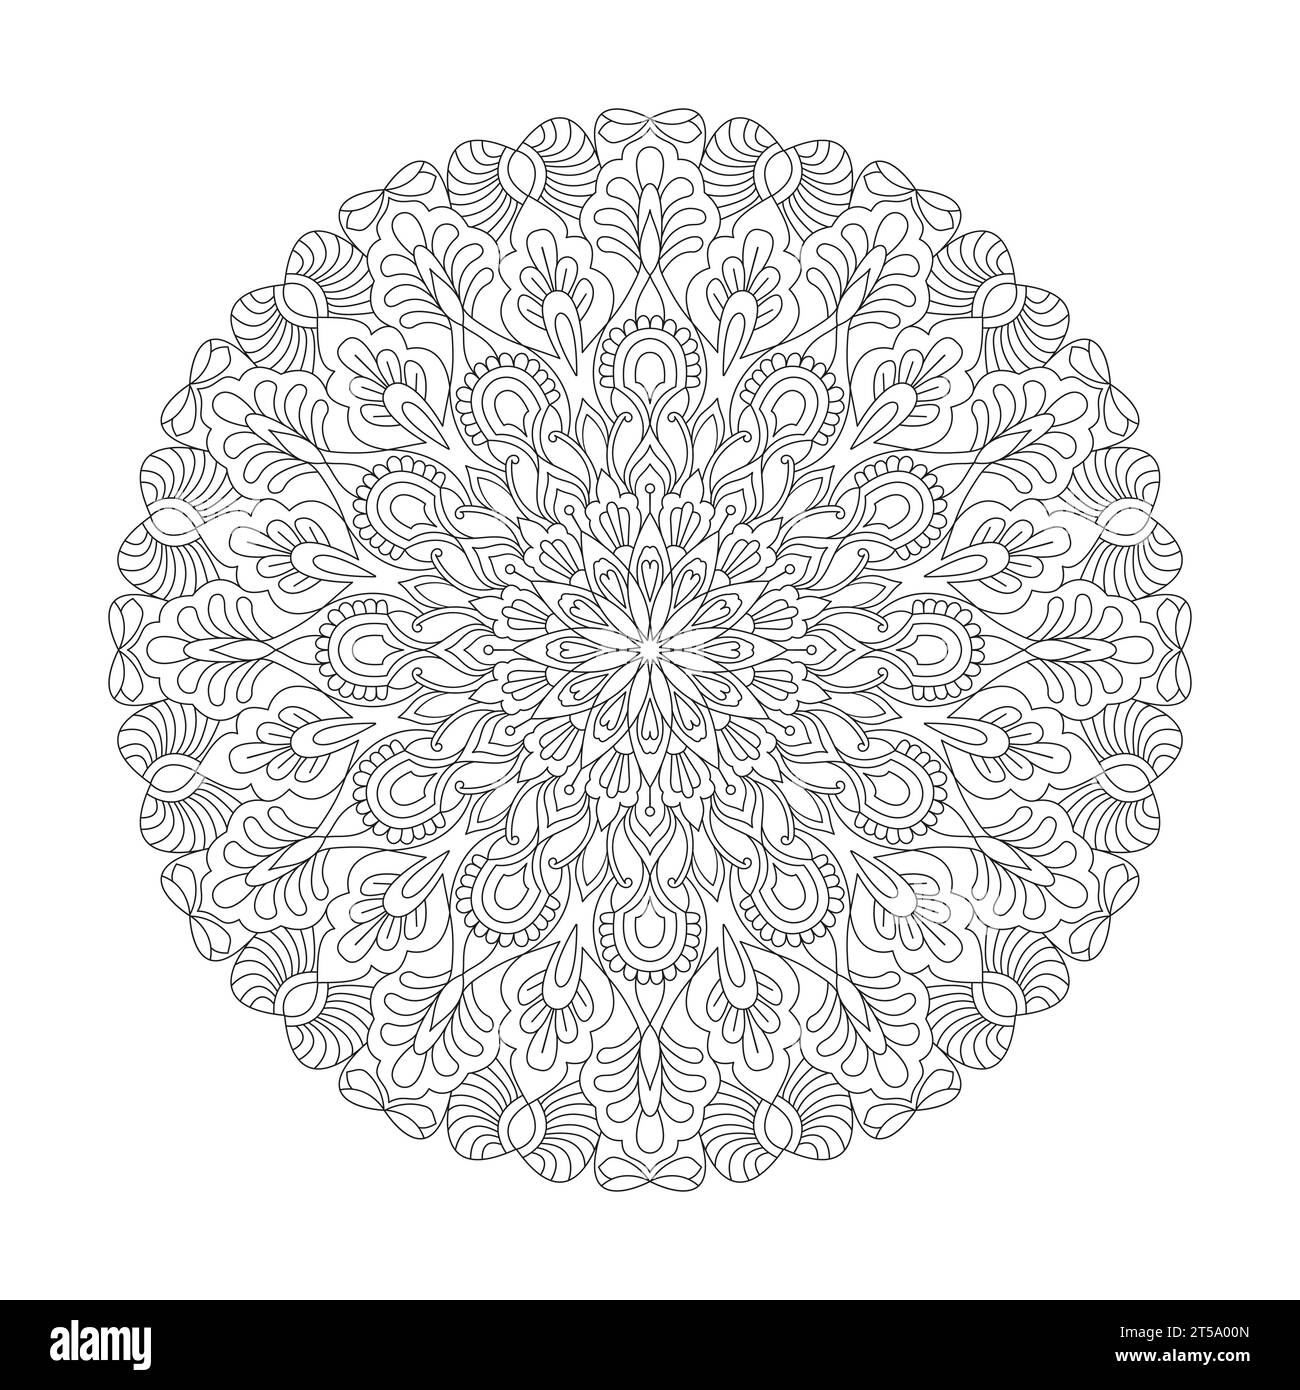 Mandala Coloring Book: Black Background Coloring Books For Adults,  Meditation and Relaxation Flower Mandalas for Women and Men